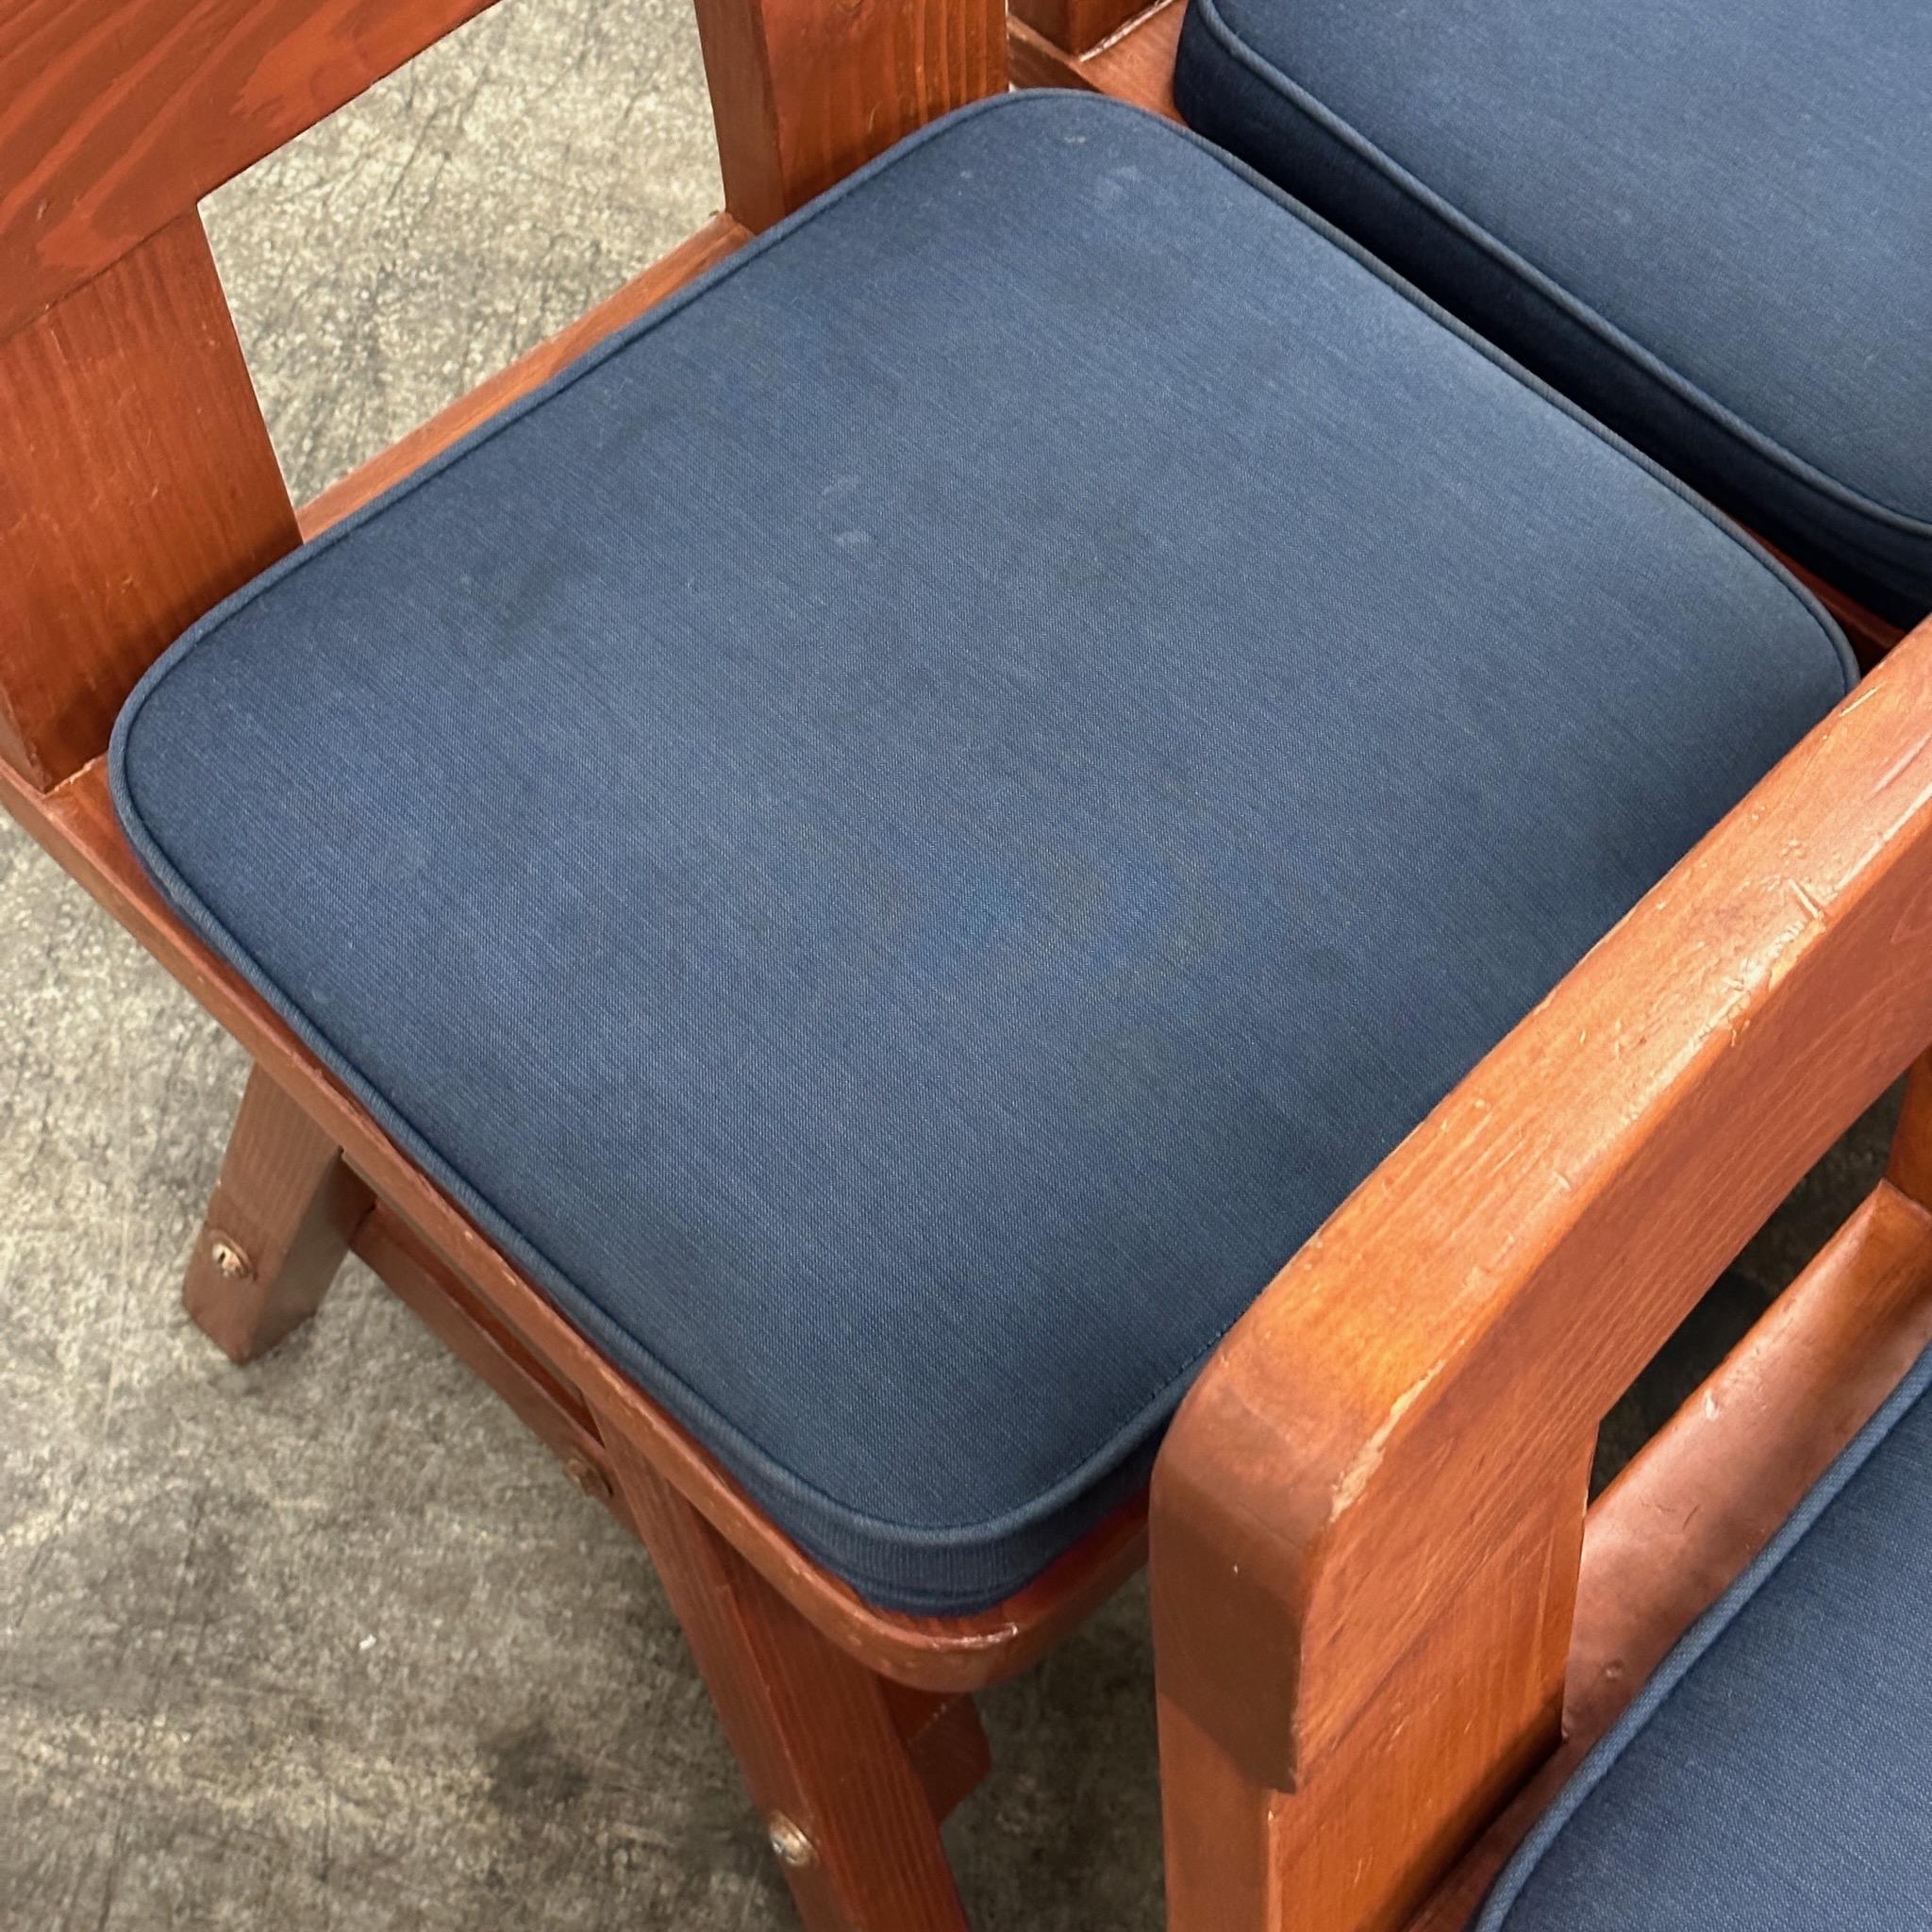 Late 20th Century Knotty Pine Low Back Dining Chairs from The Chicago Athletic Association For Sale